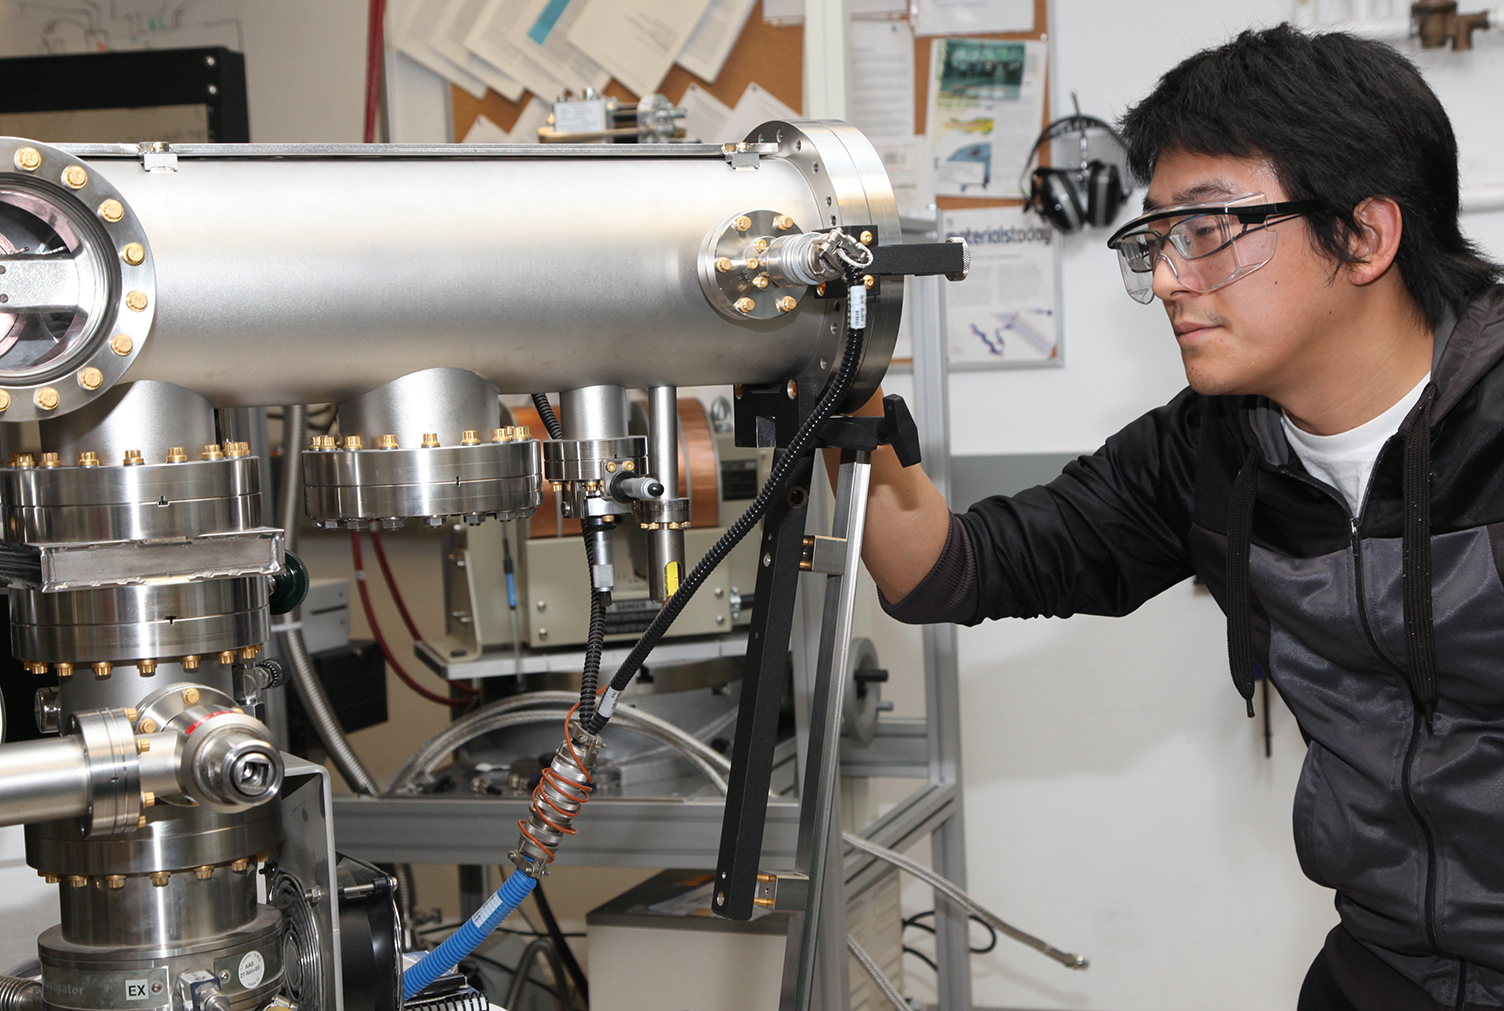 Nanoscale Engineering student looks at tool in a lab on SUNY Poly's Albany campus